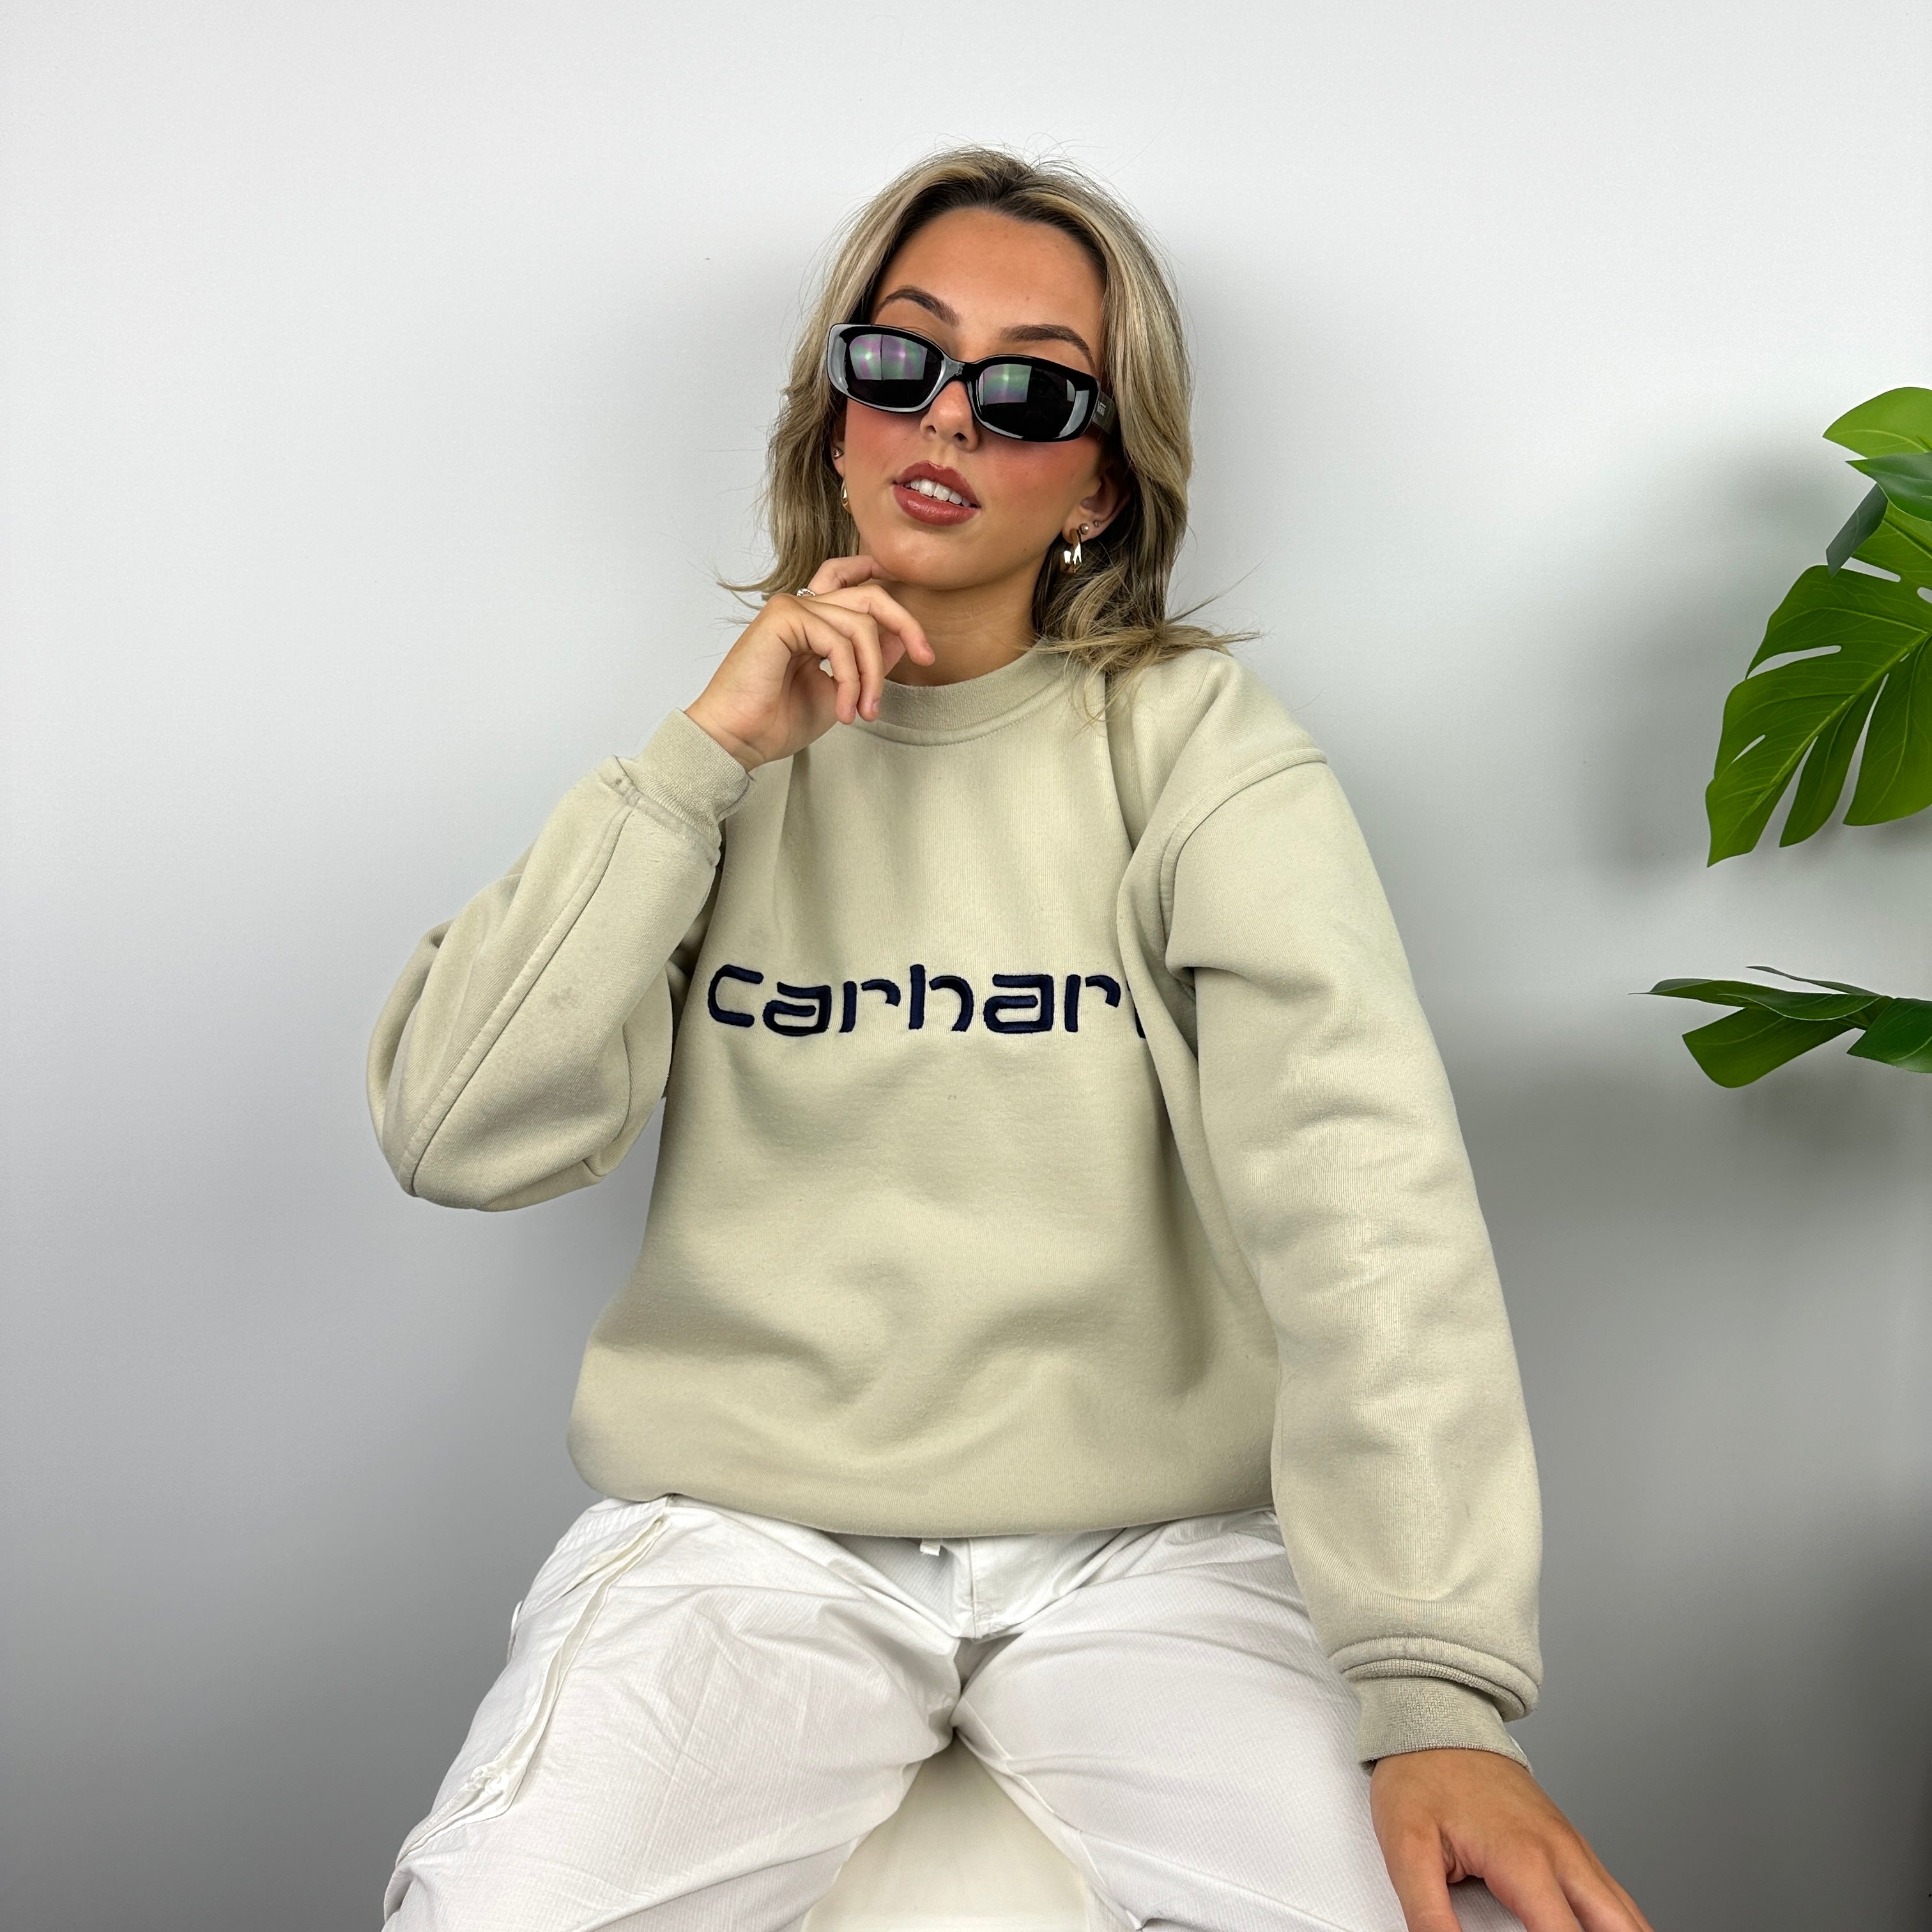 Carhartt Cream Embroidered Spell Out Sweatshirt (M)